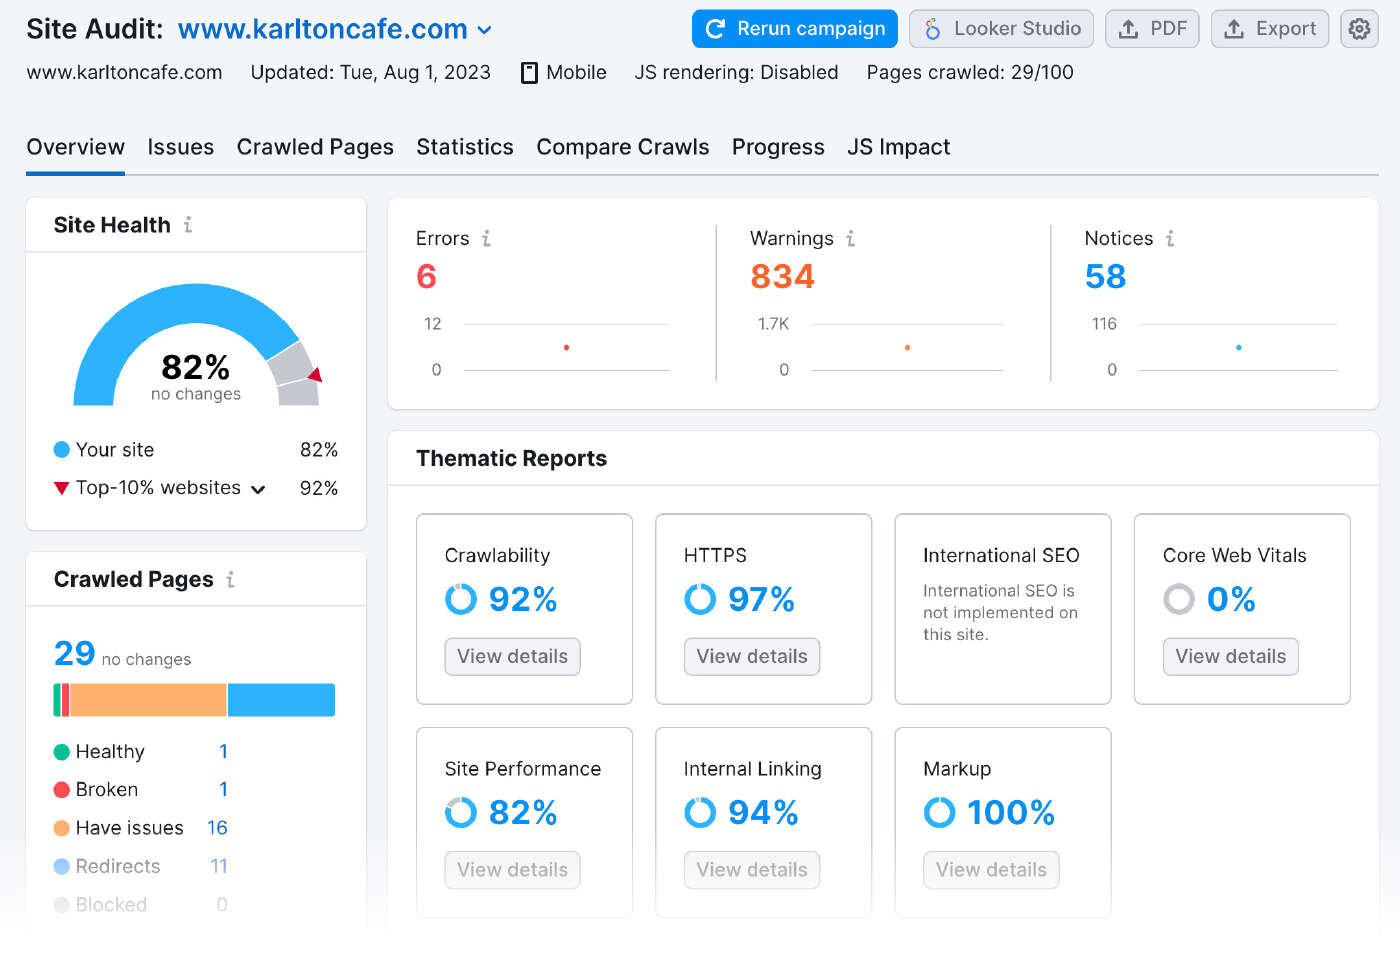 "Overview" dashboard in the Site Audit tool